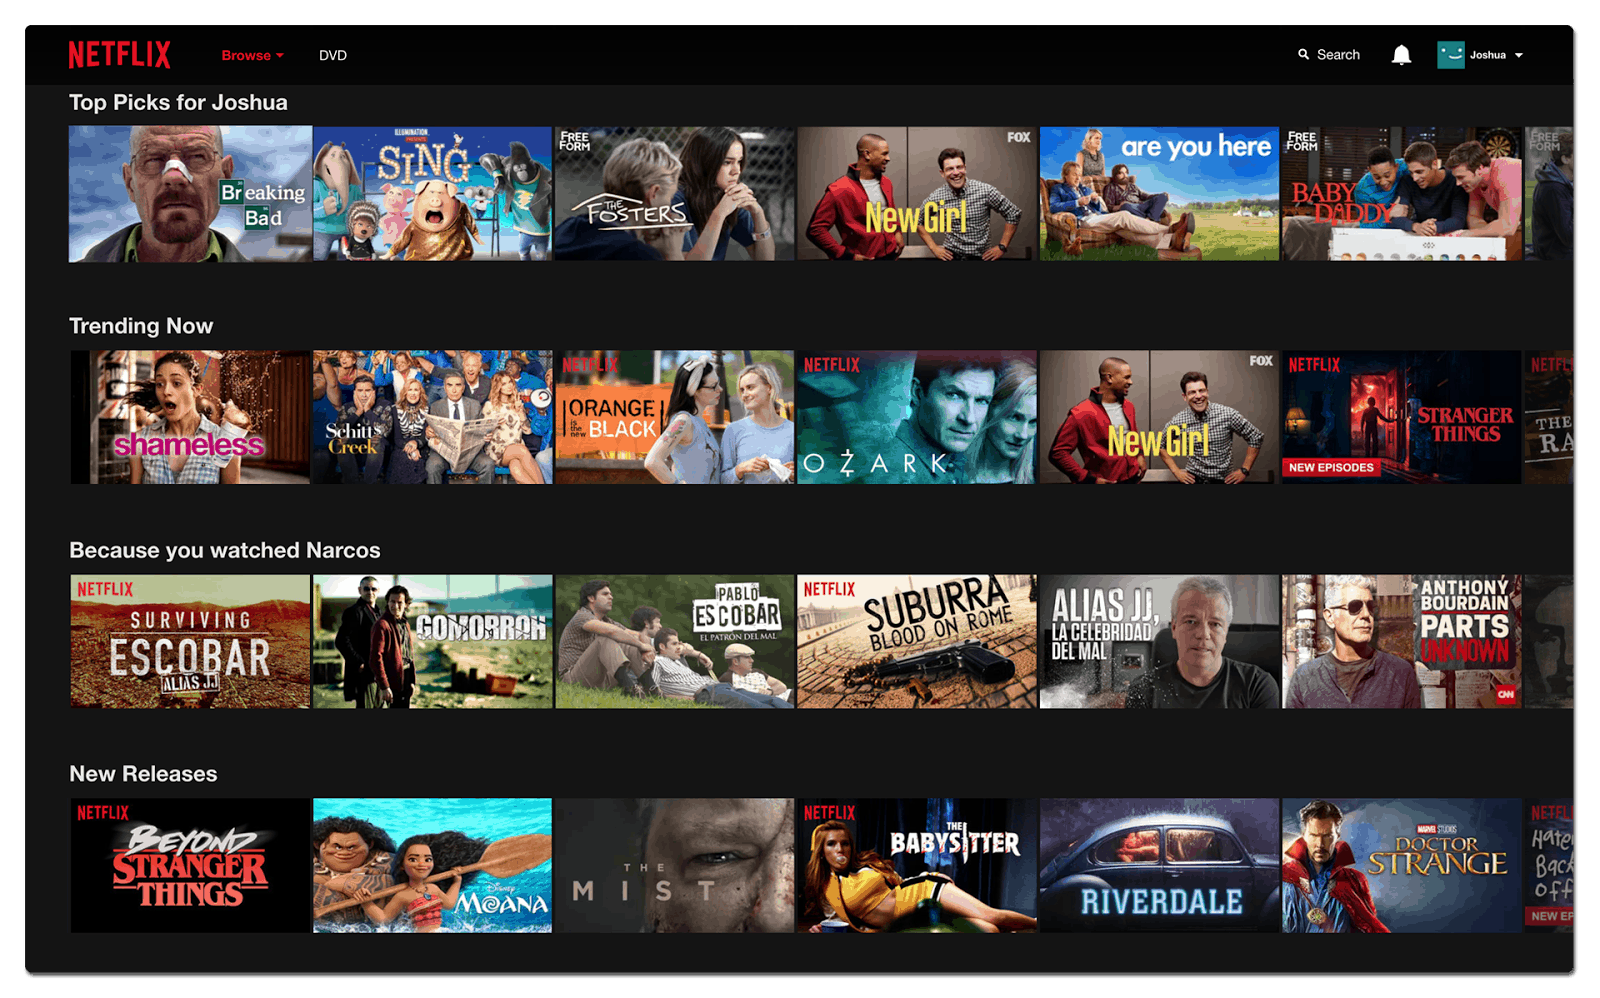 Netflix providing personalized recommendations for series and movies